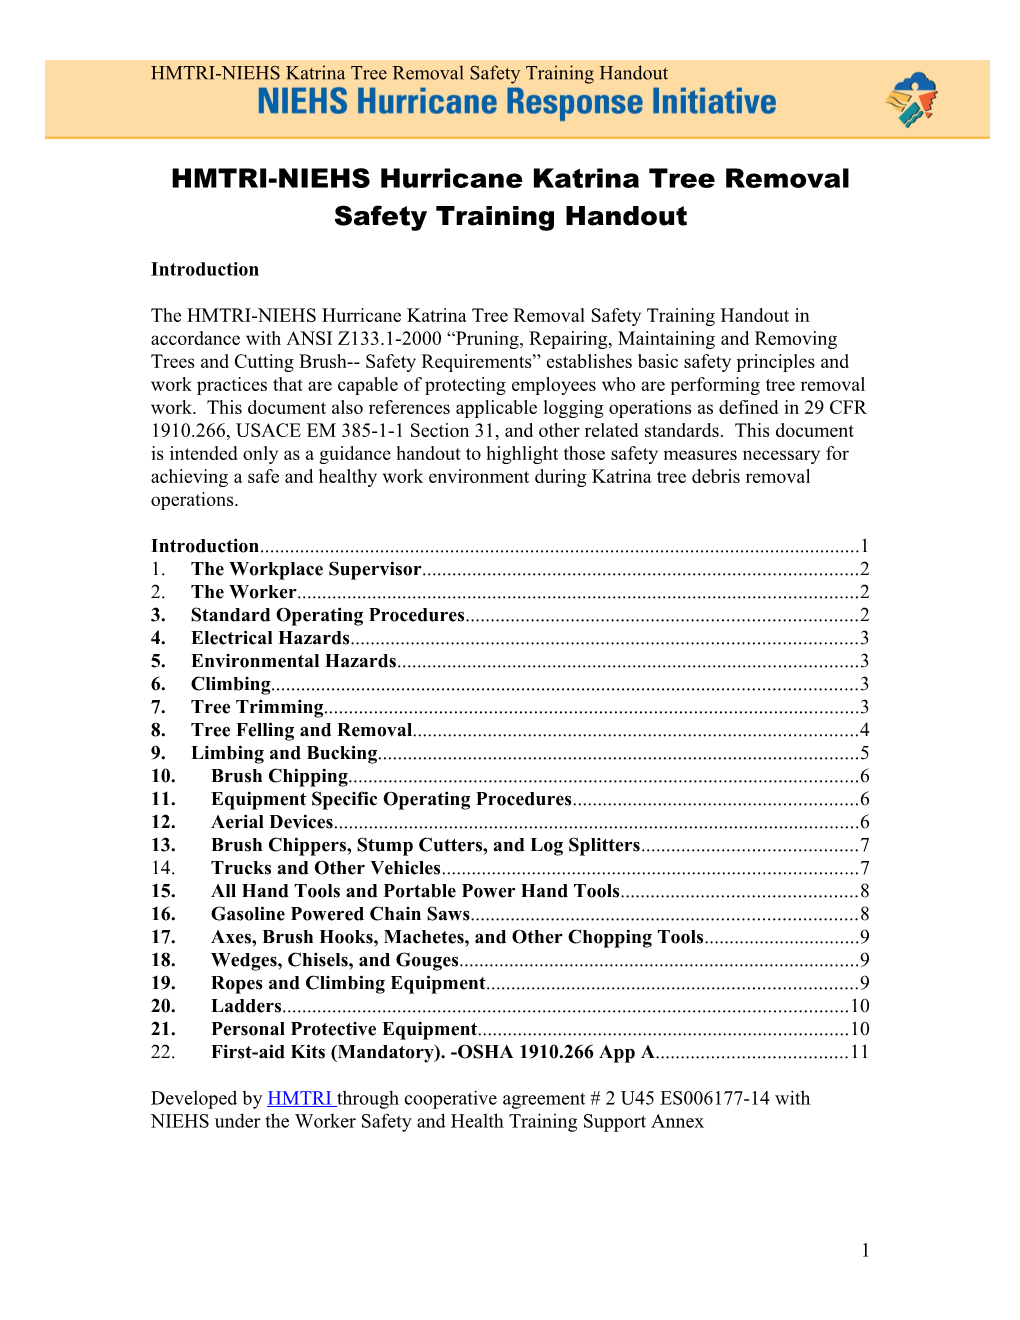 HMTRI-NIEHS Tree Removal Safety Guidlines